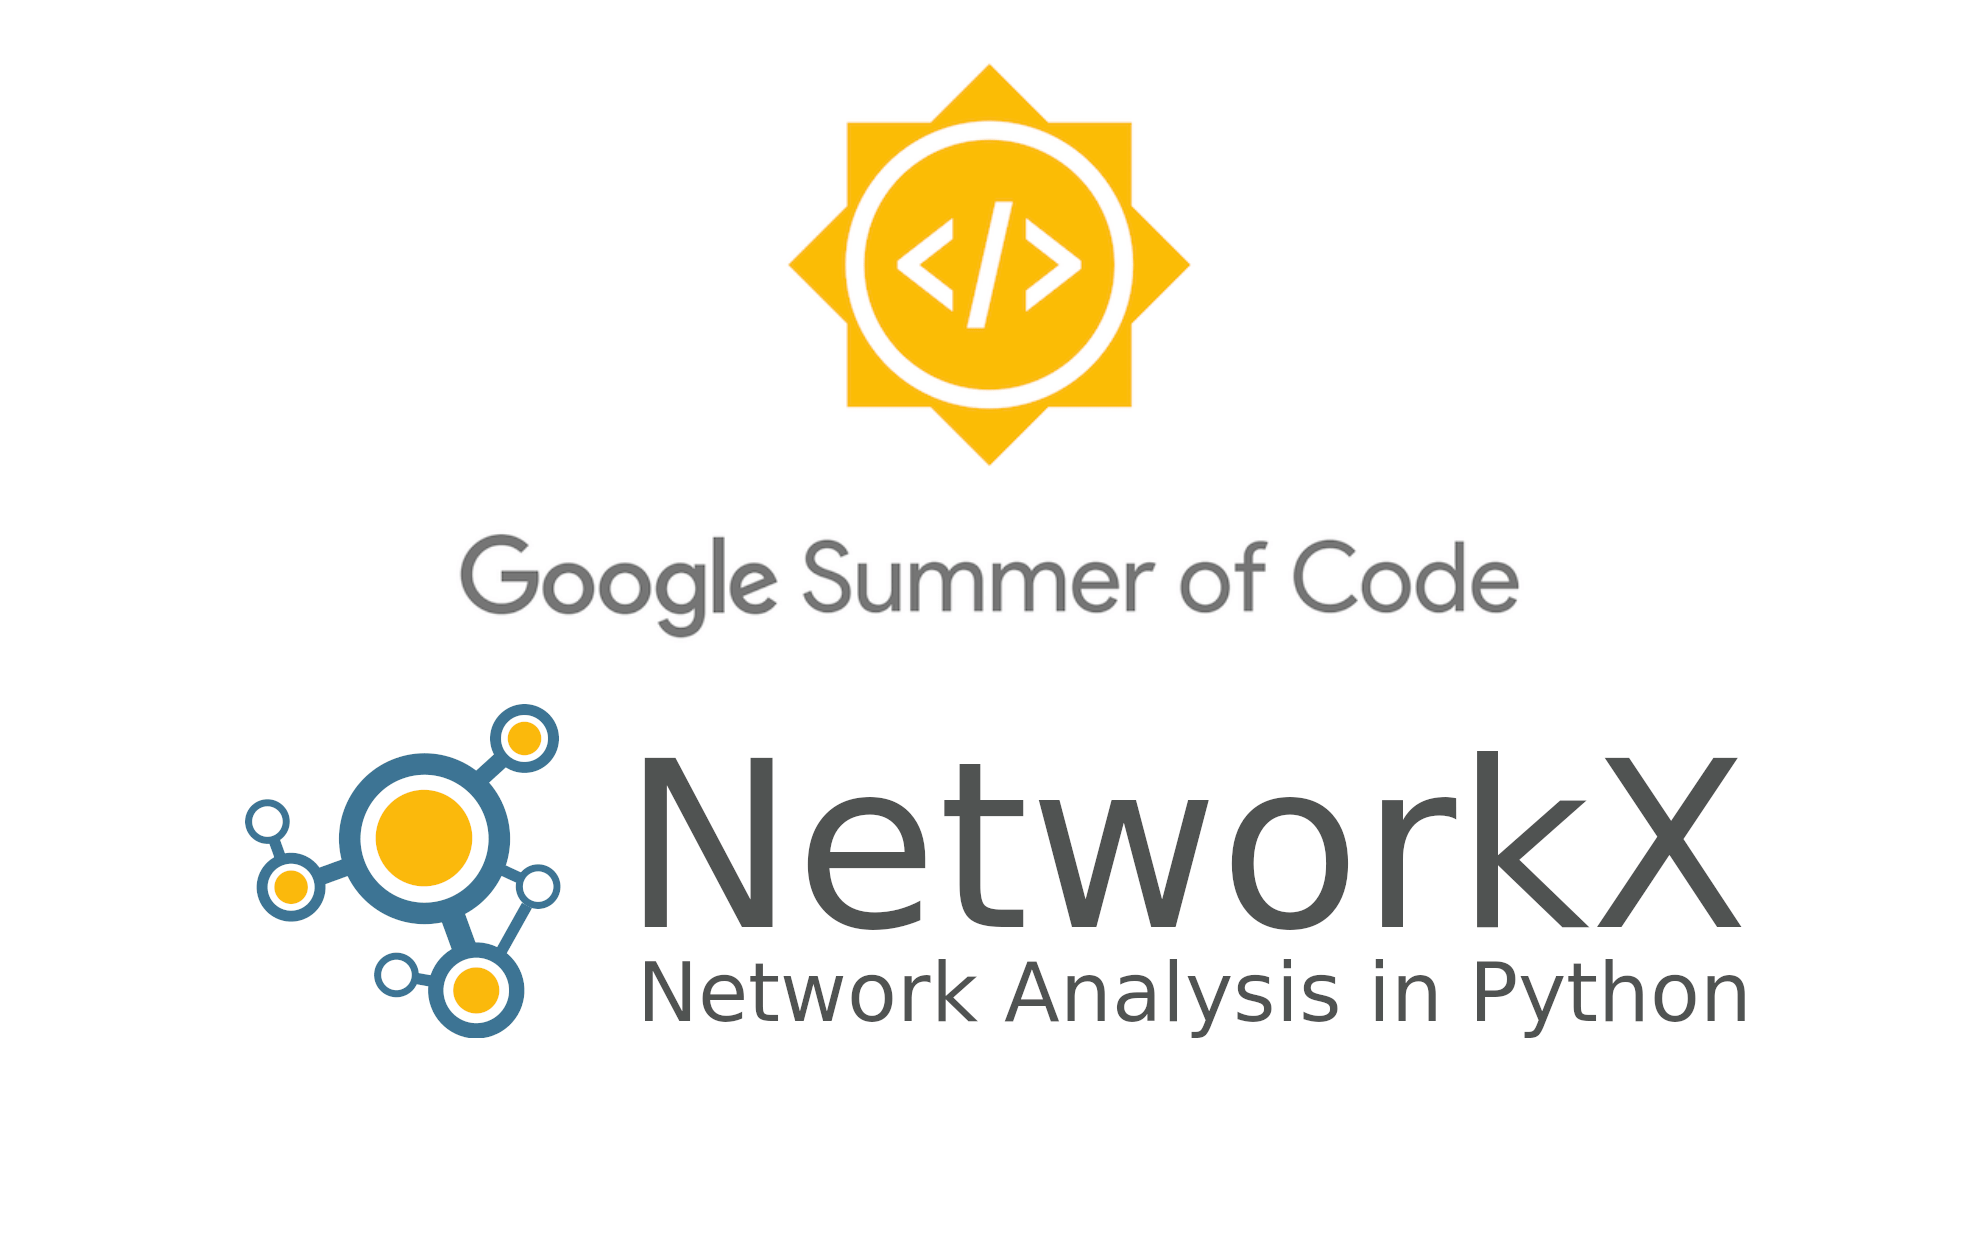 Google Summer of Code Logo with NetworkX logo